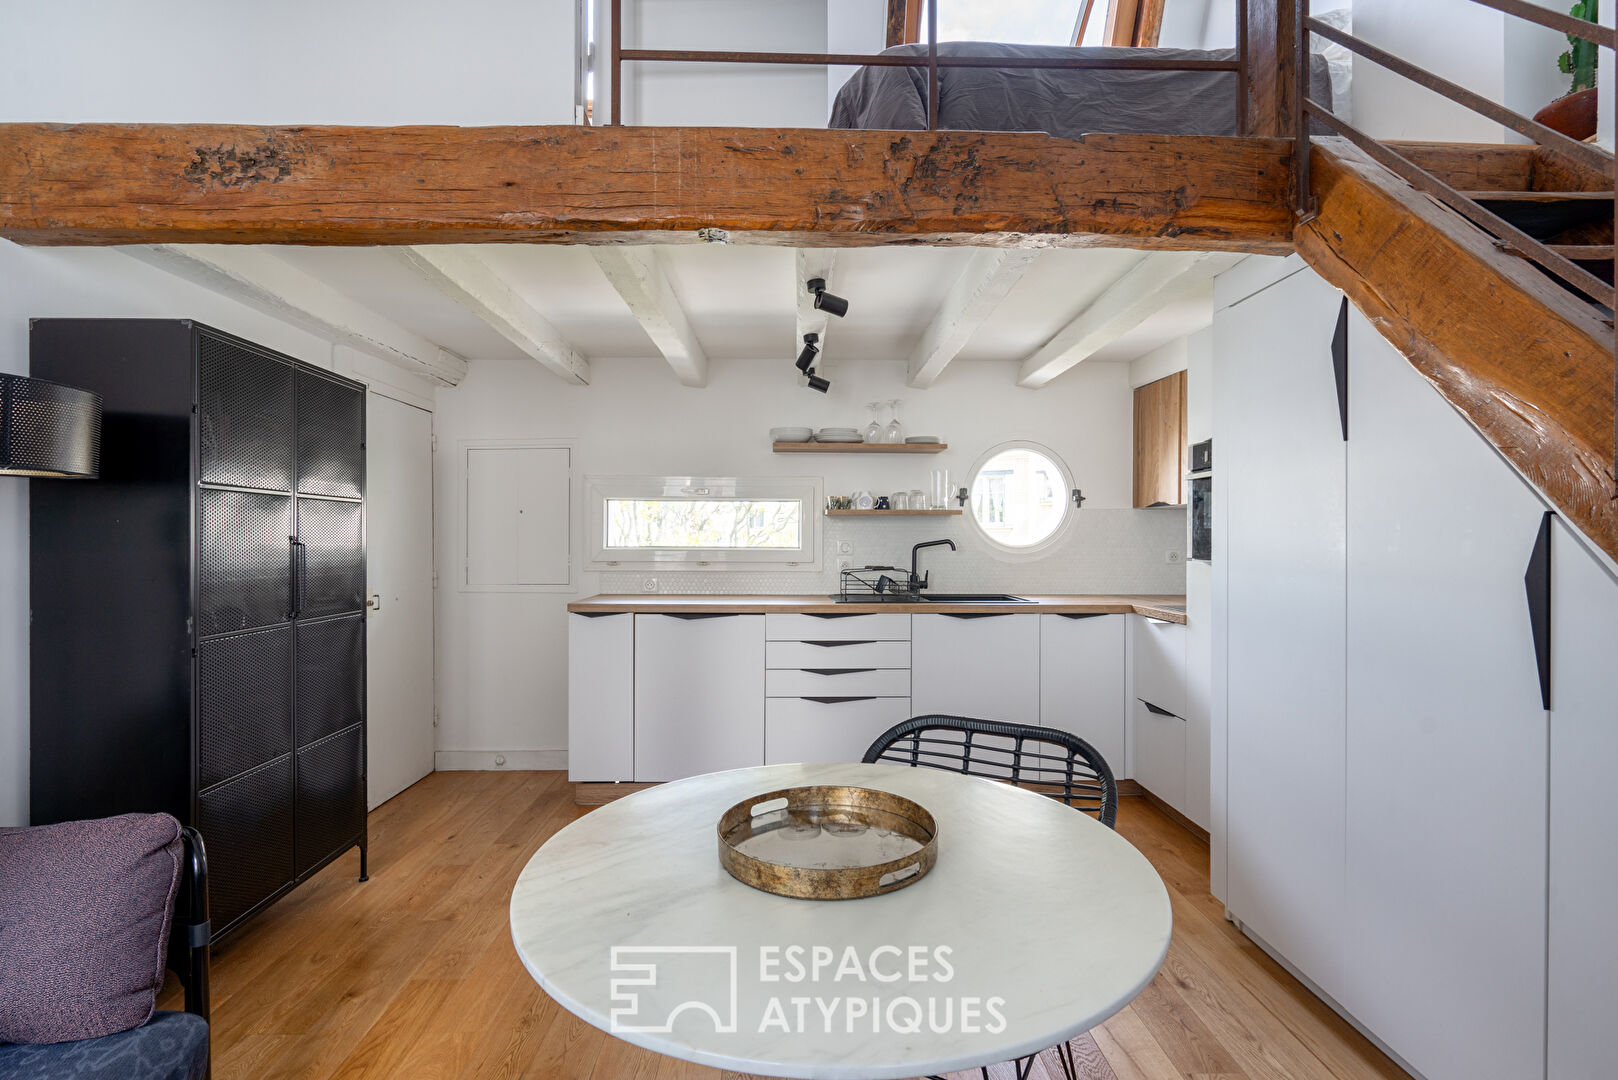 Top floor with mezzanine, close to the Luxembourg Gardens